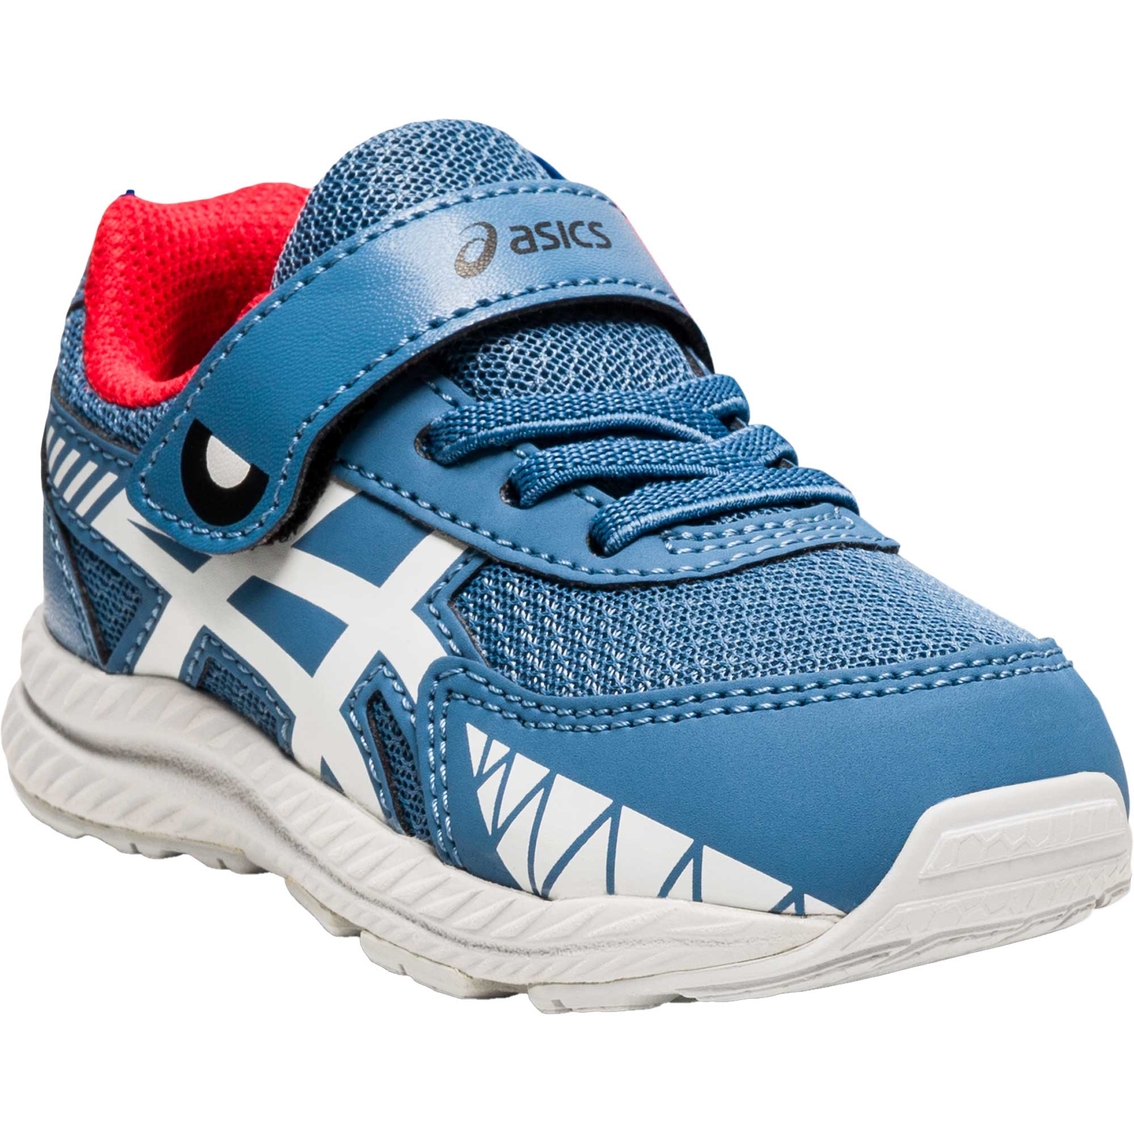 Asics Toddler Contend Schoolyard Running Shoes | Children's Shoes | Shoes | Shop The Exchange